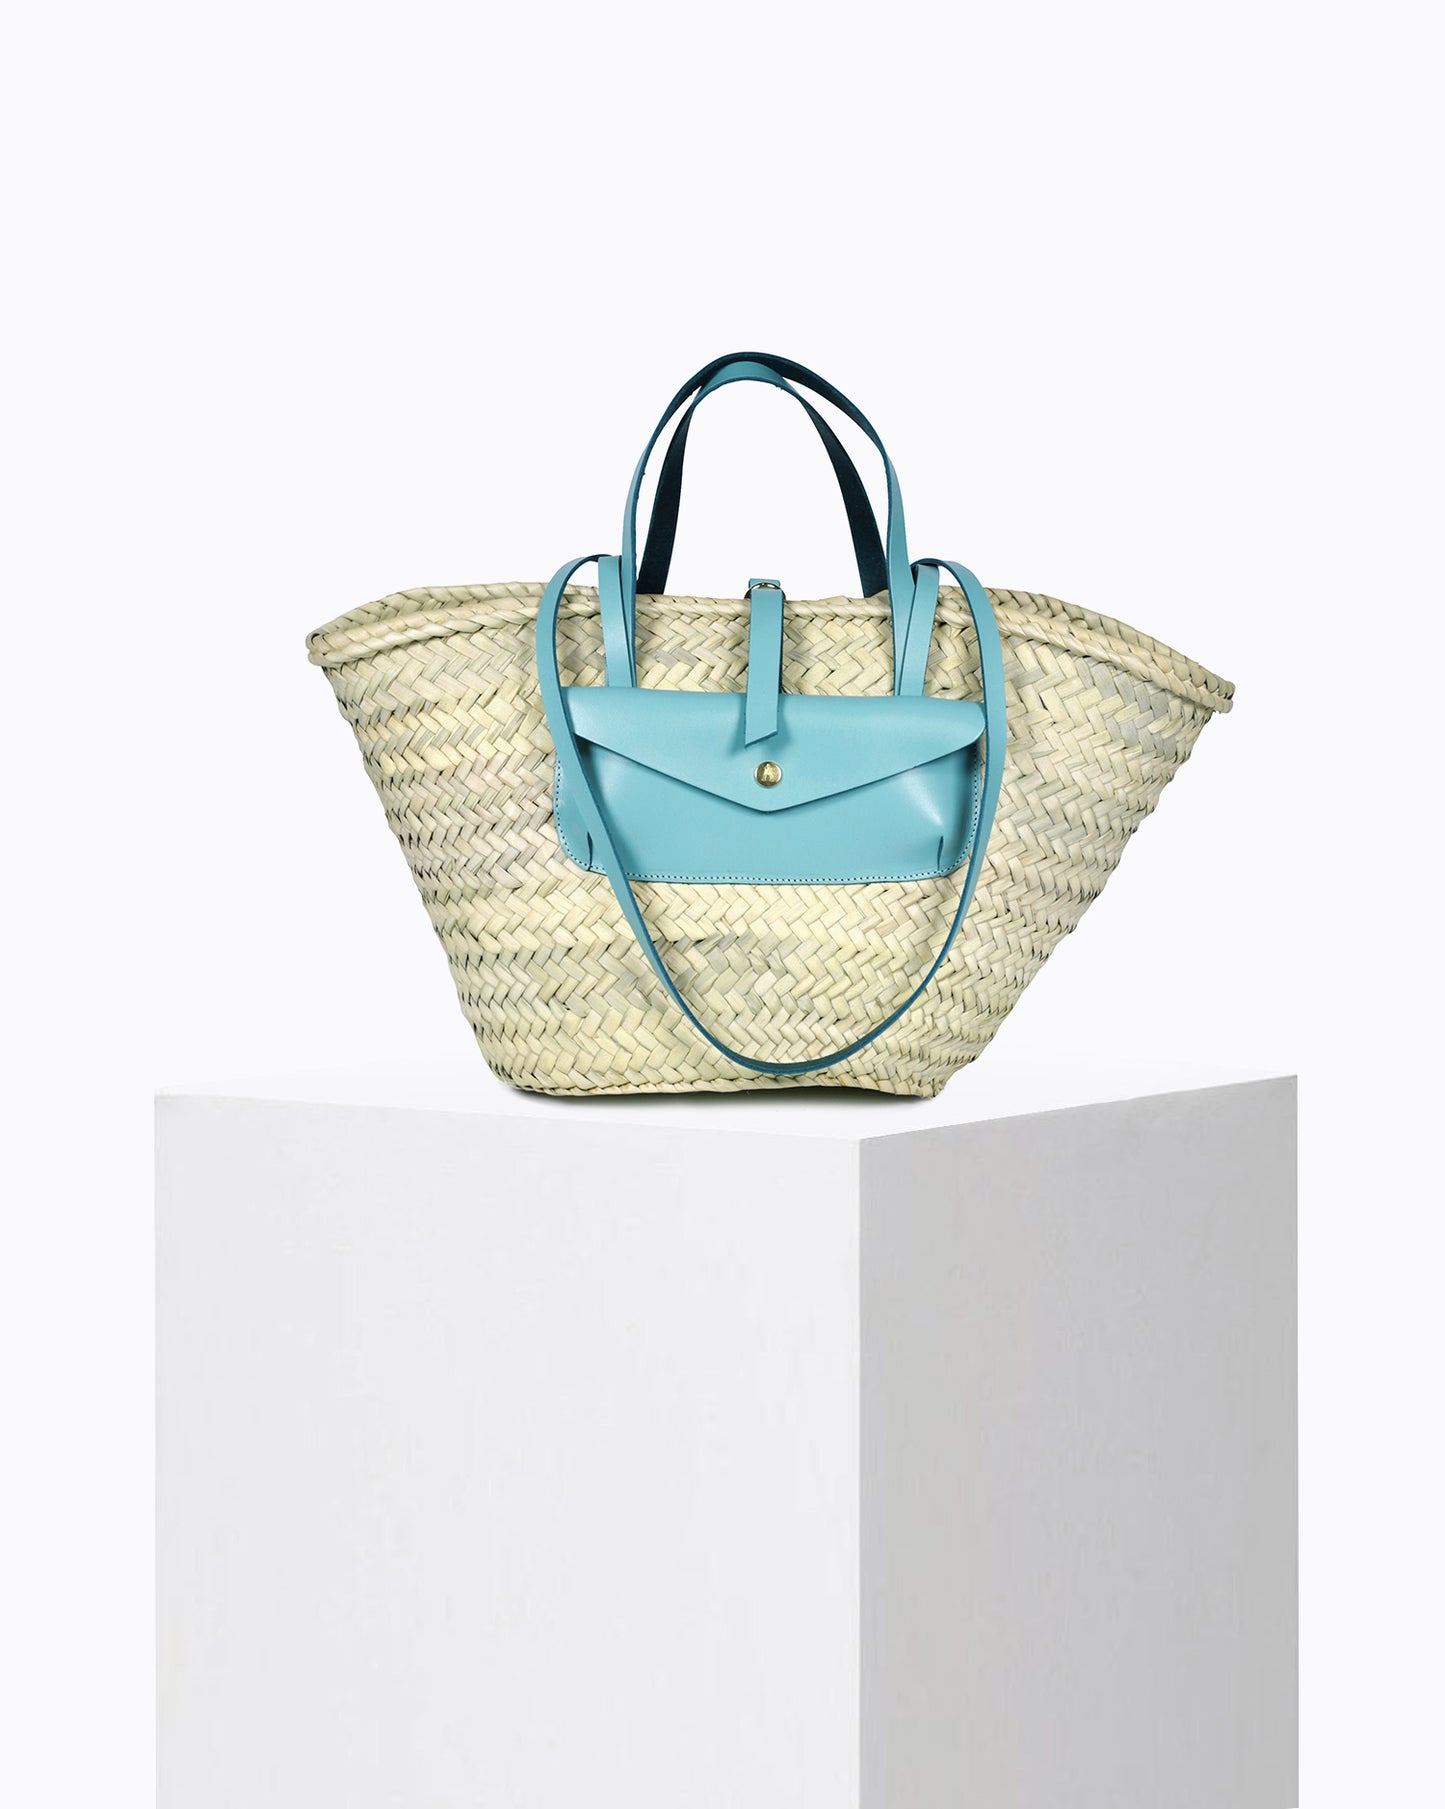 Panier in Turquoise